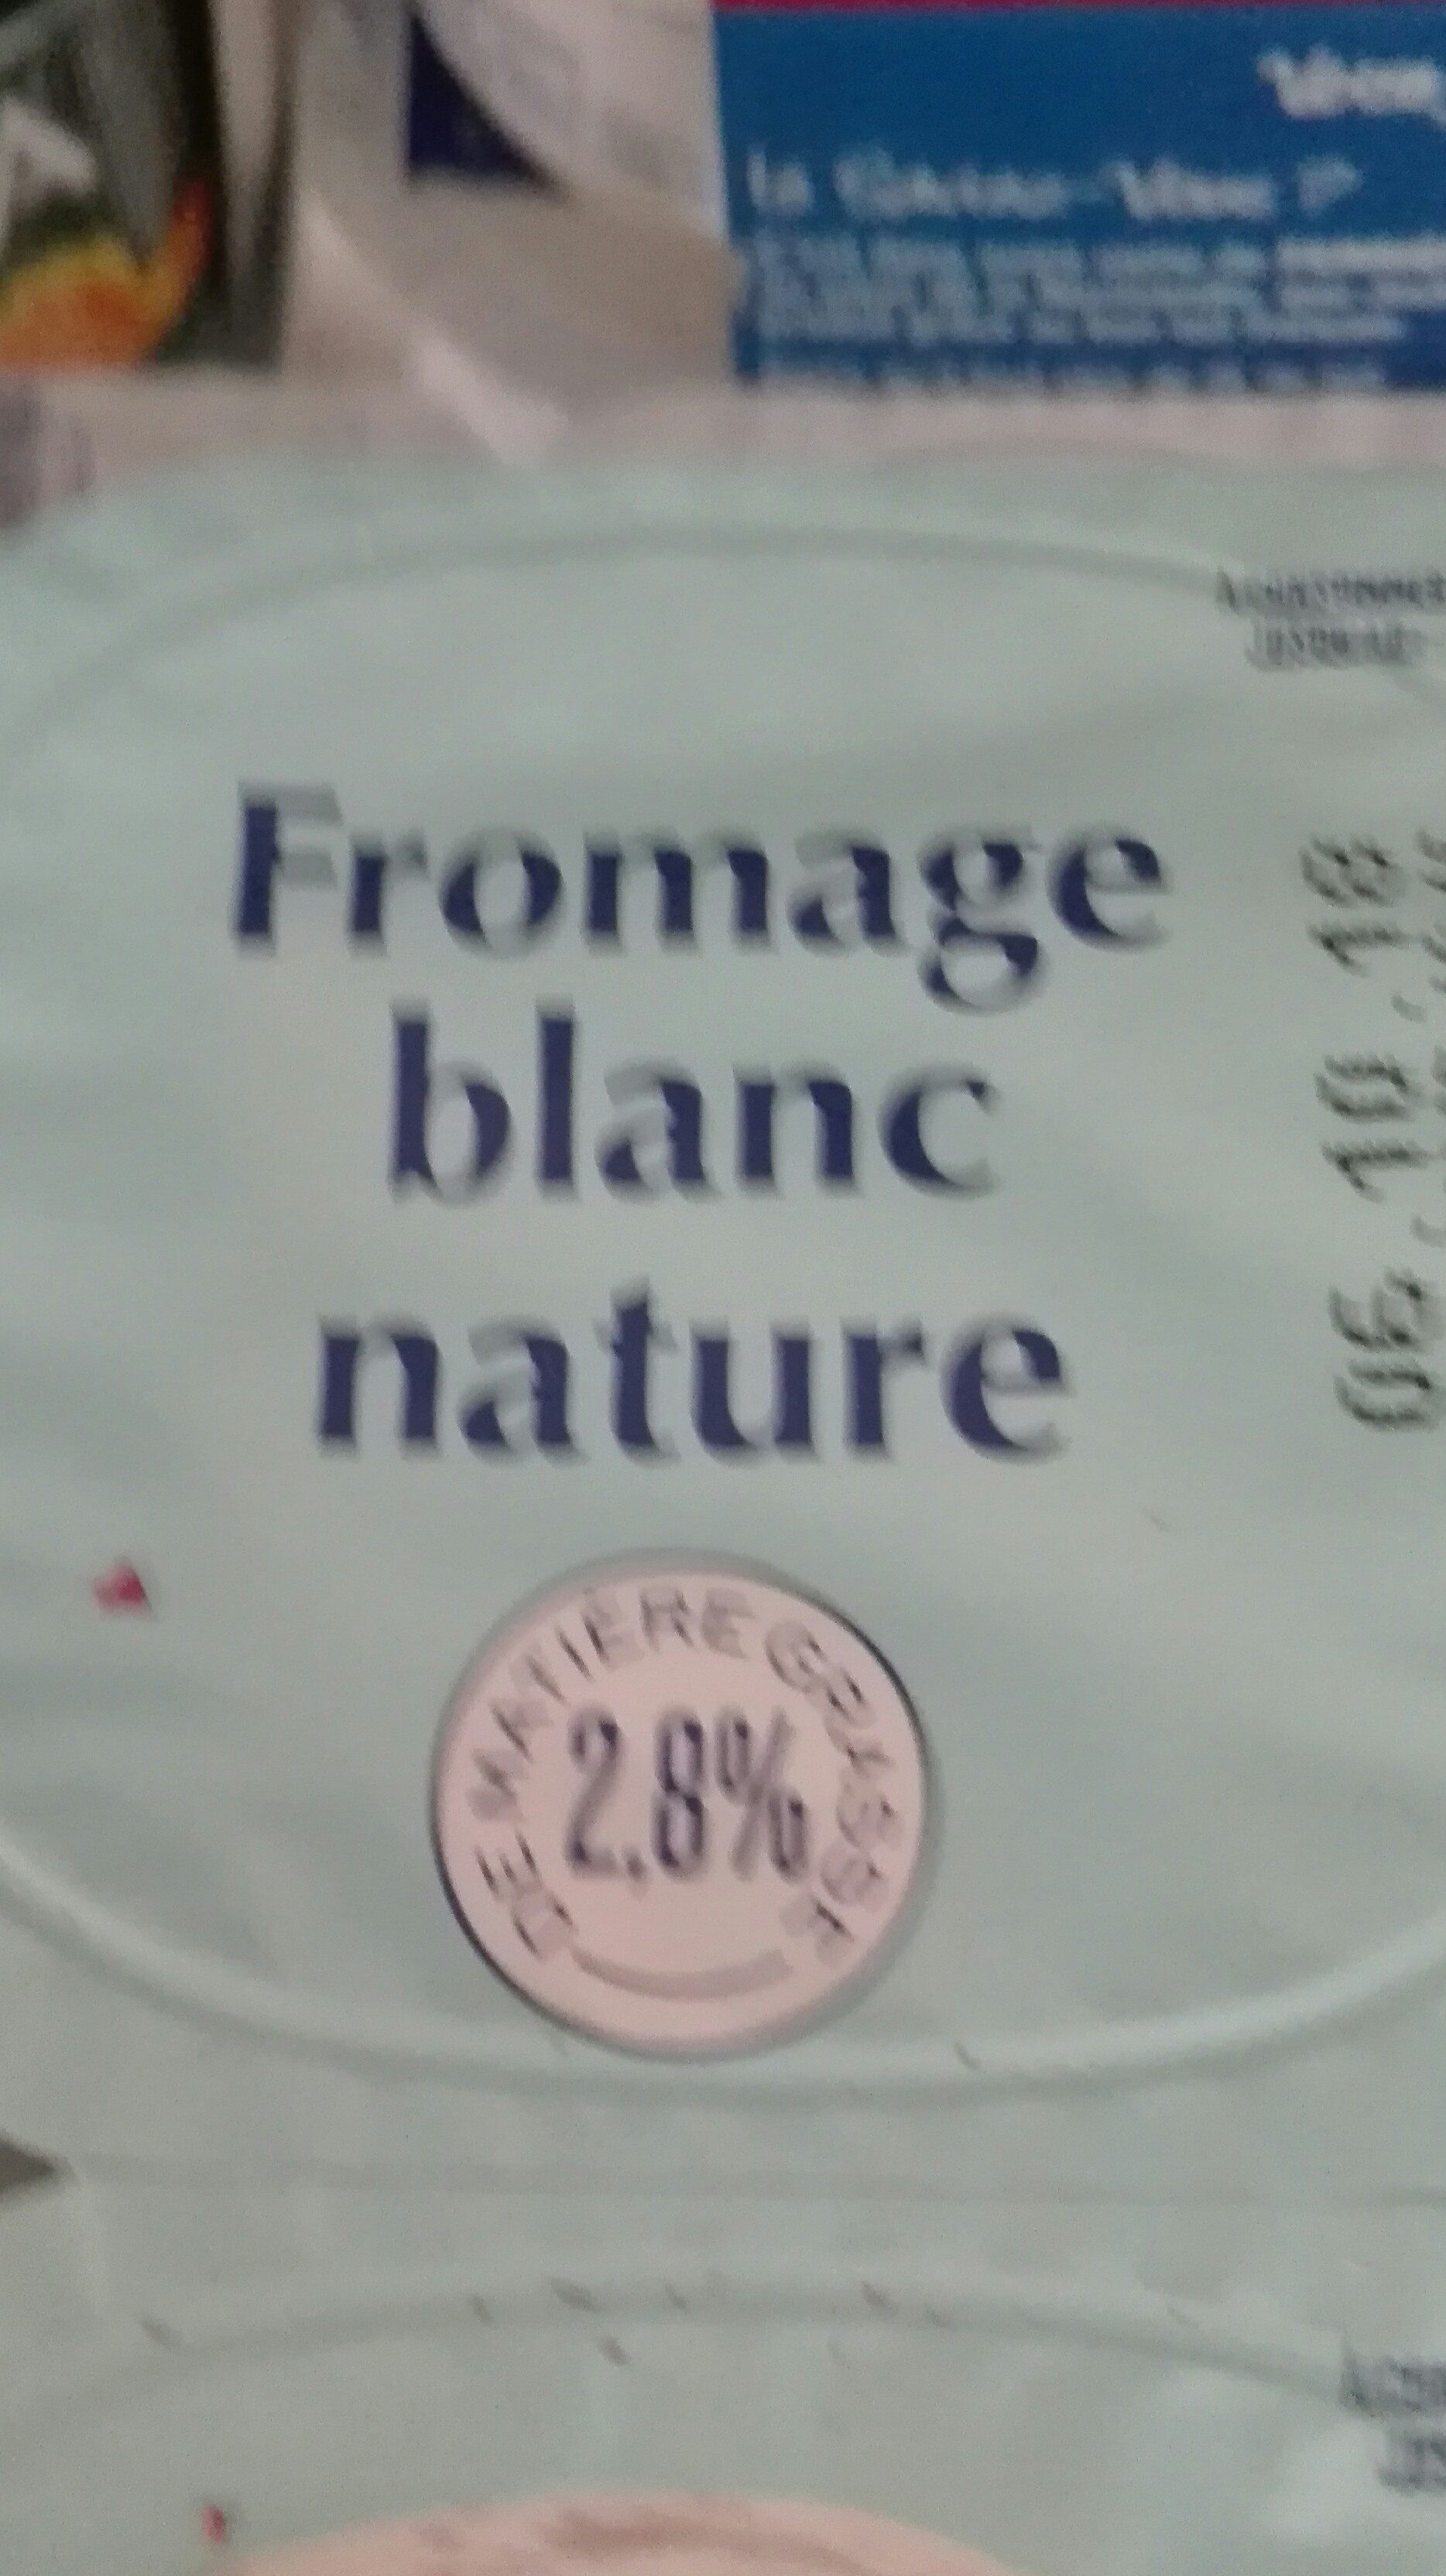 Fromage bmanc nature - Product - fr